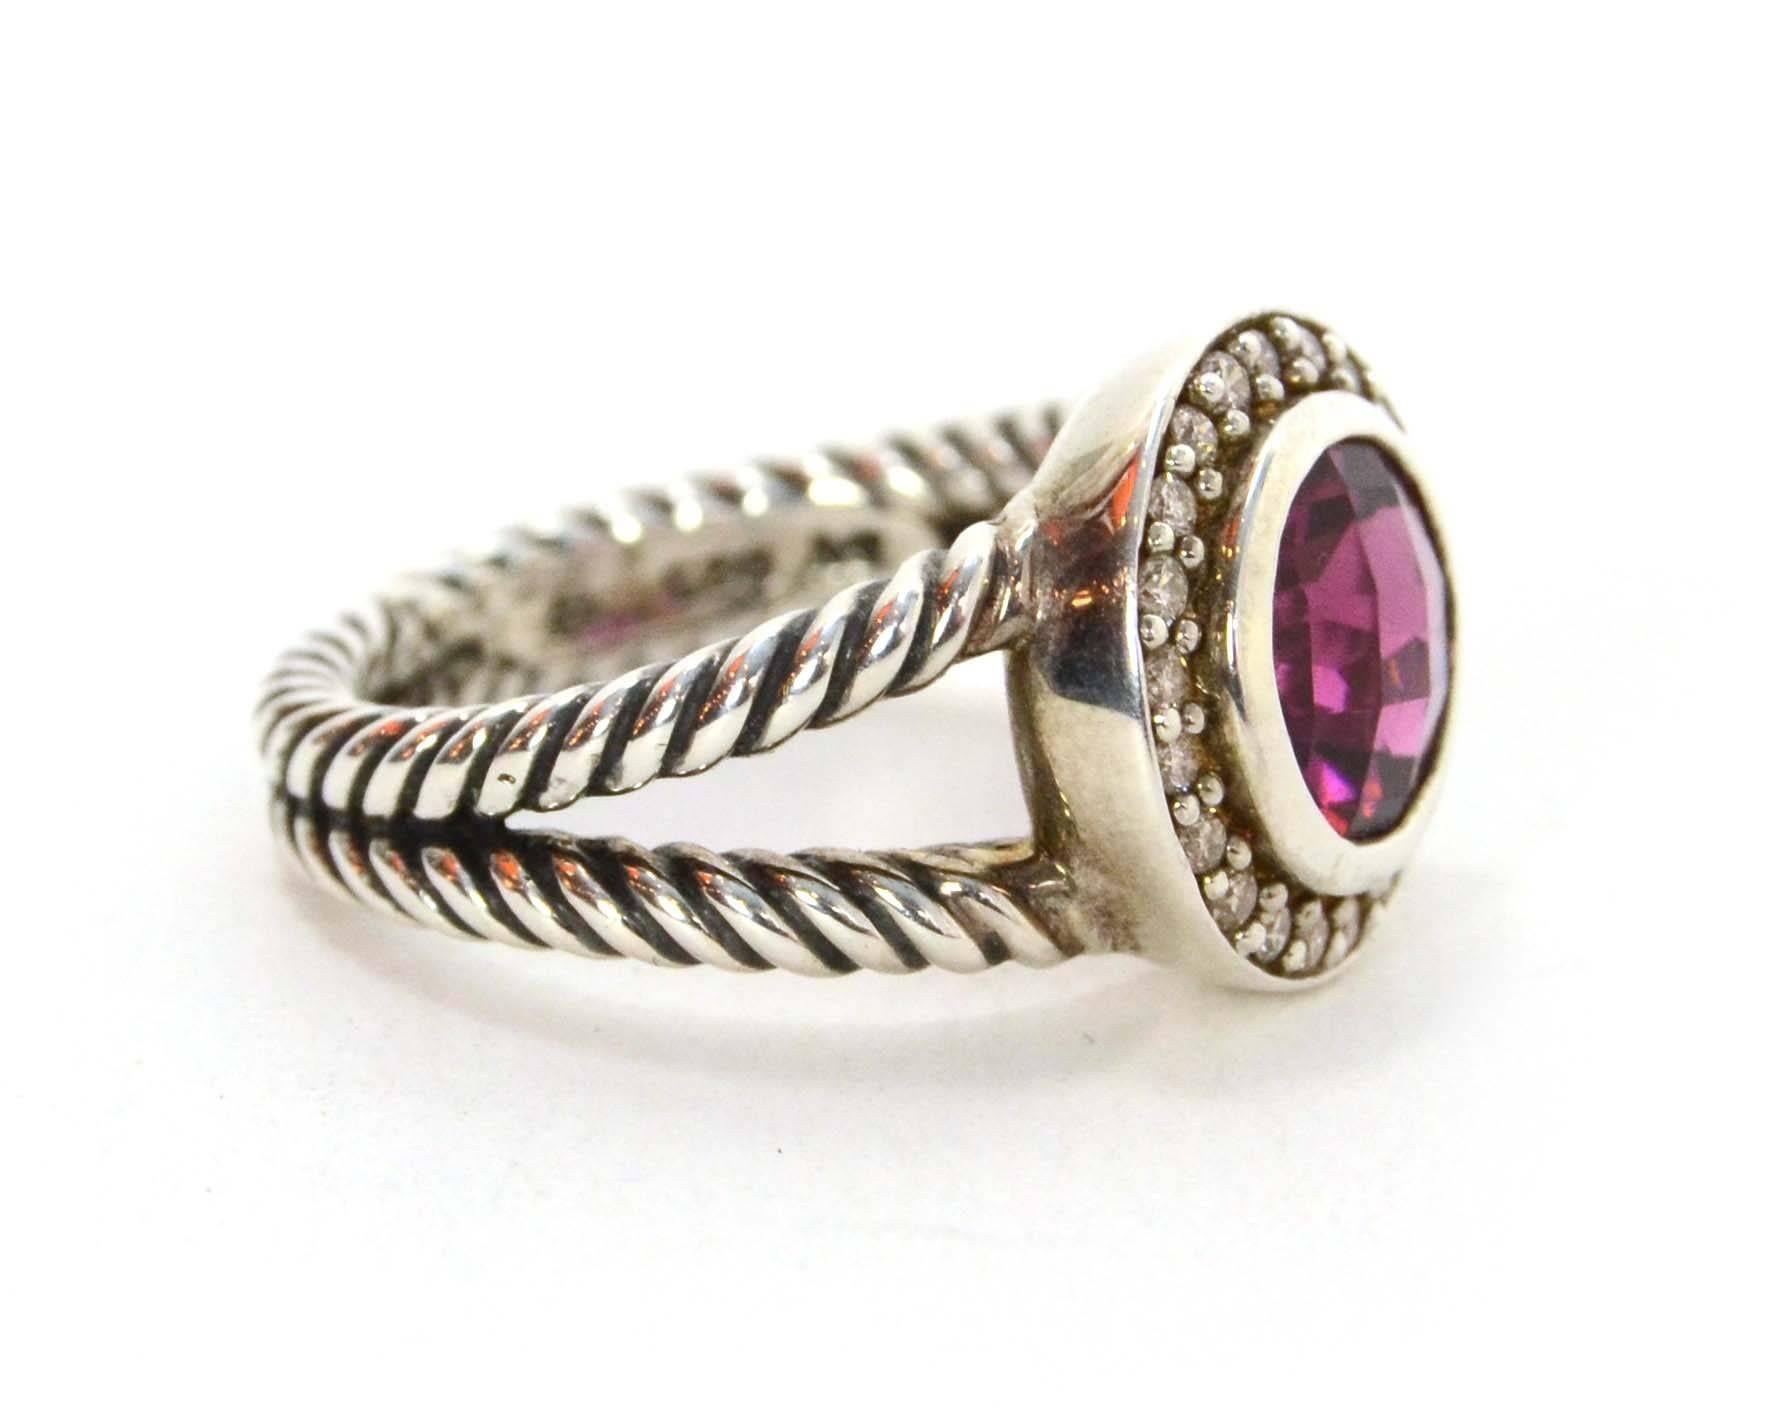 David Yurman Diamond & Sterling Cerise Ring 
Features pale purple center stone surrounded by small diamonds
Color: Silver and pale purple
Materials: Sterling silver, diamond and stone
Closure: None
Stamp: 925
Retail Price: $675 + tax
Overall